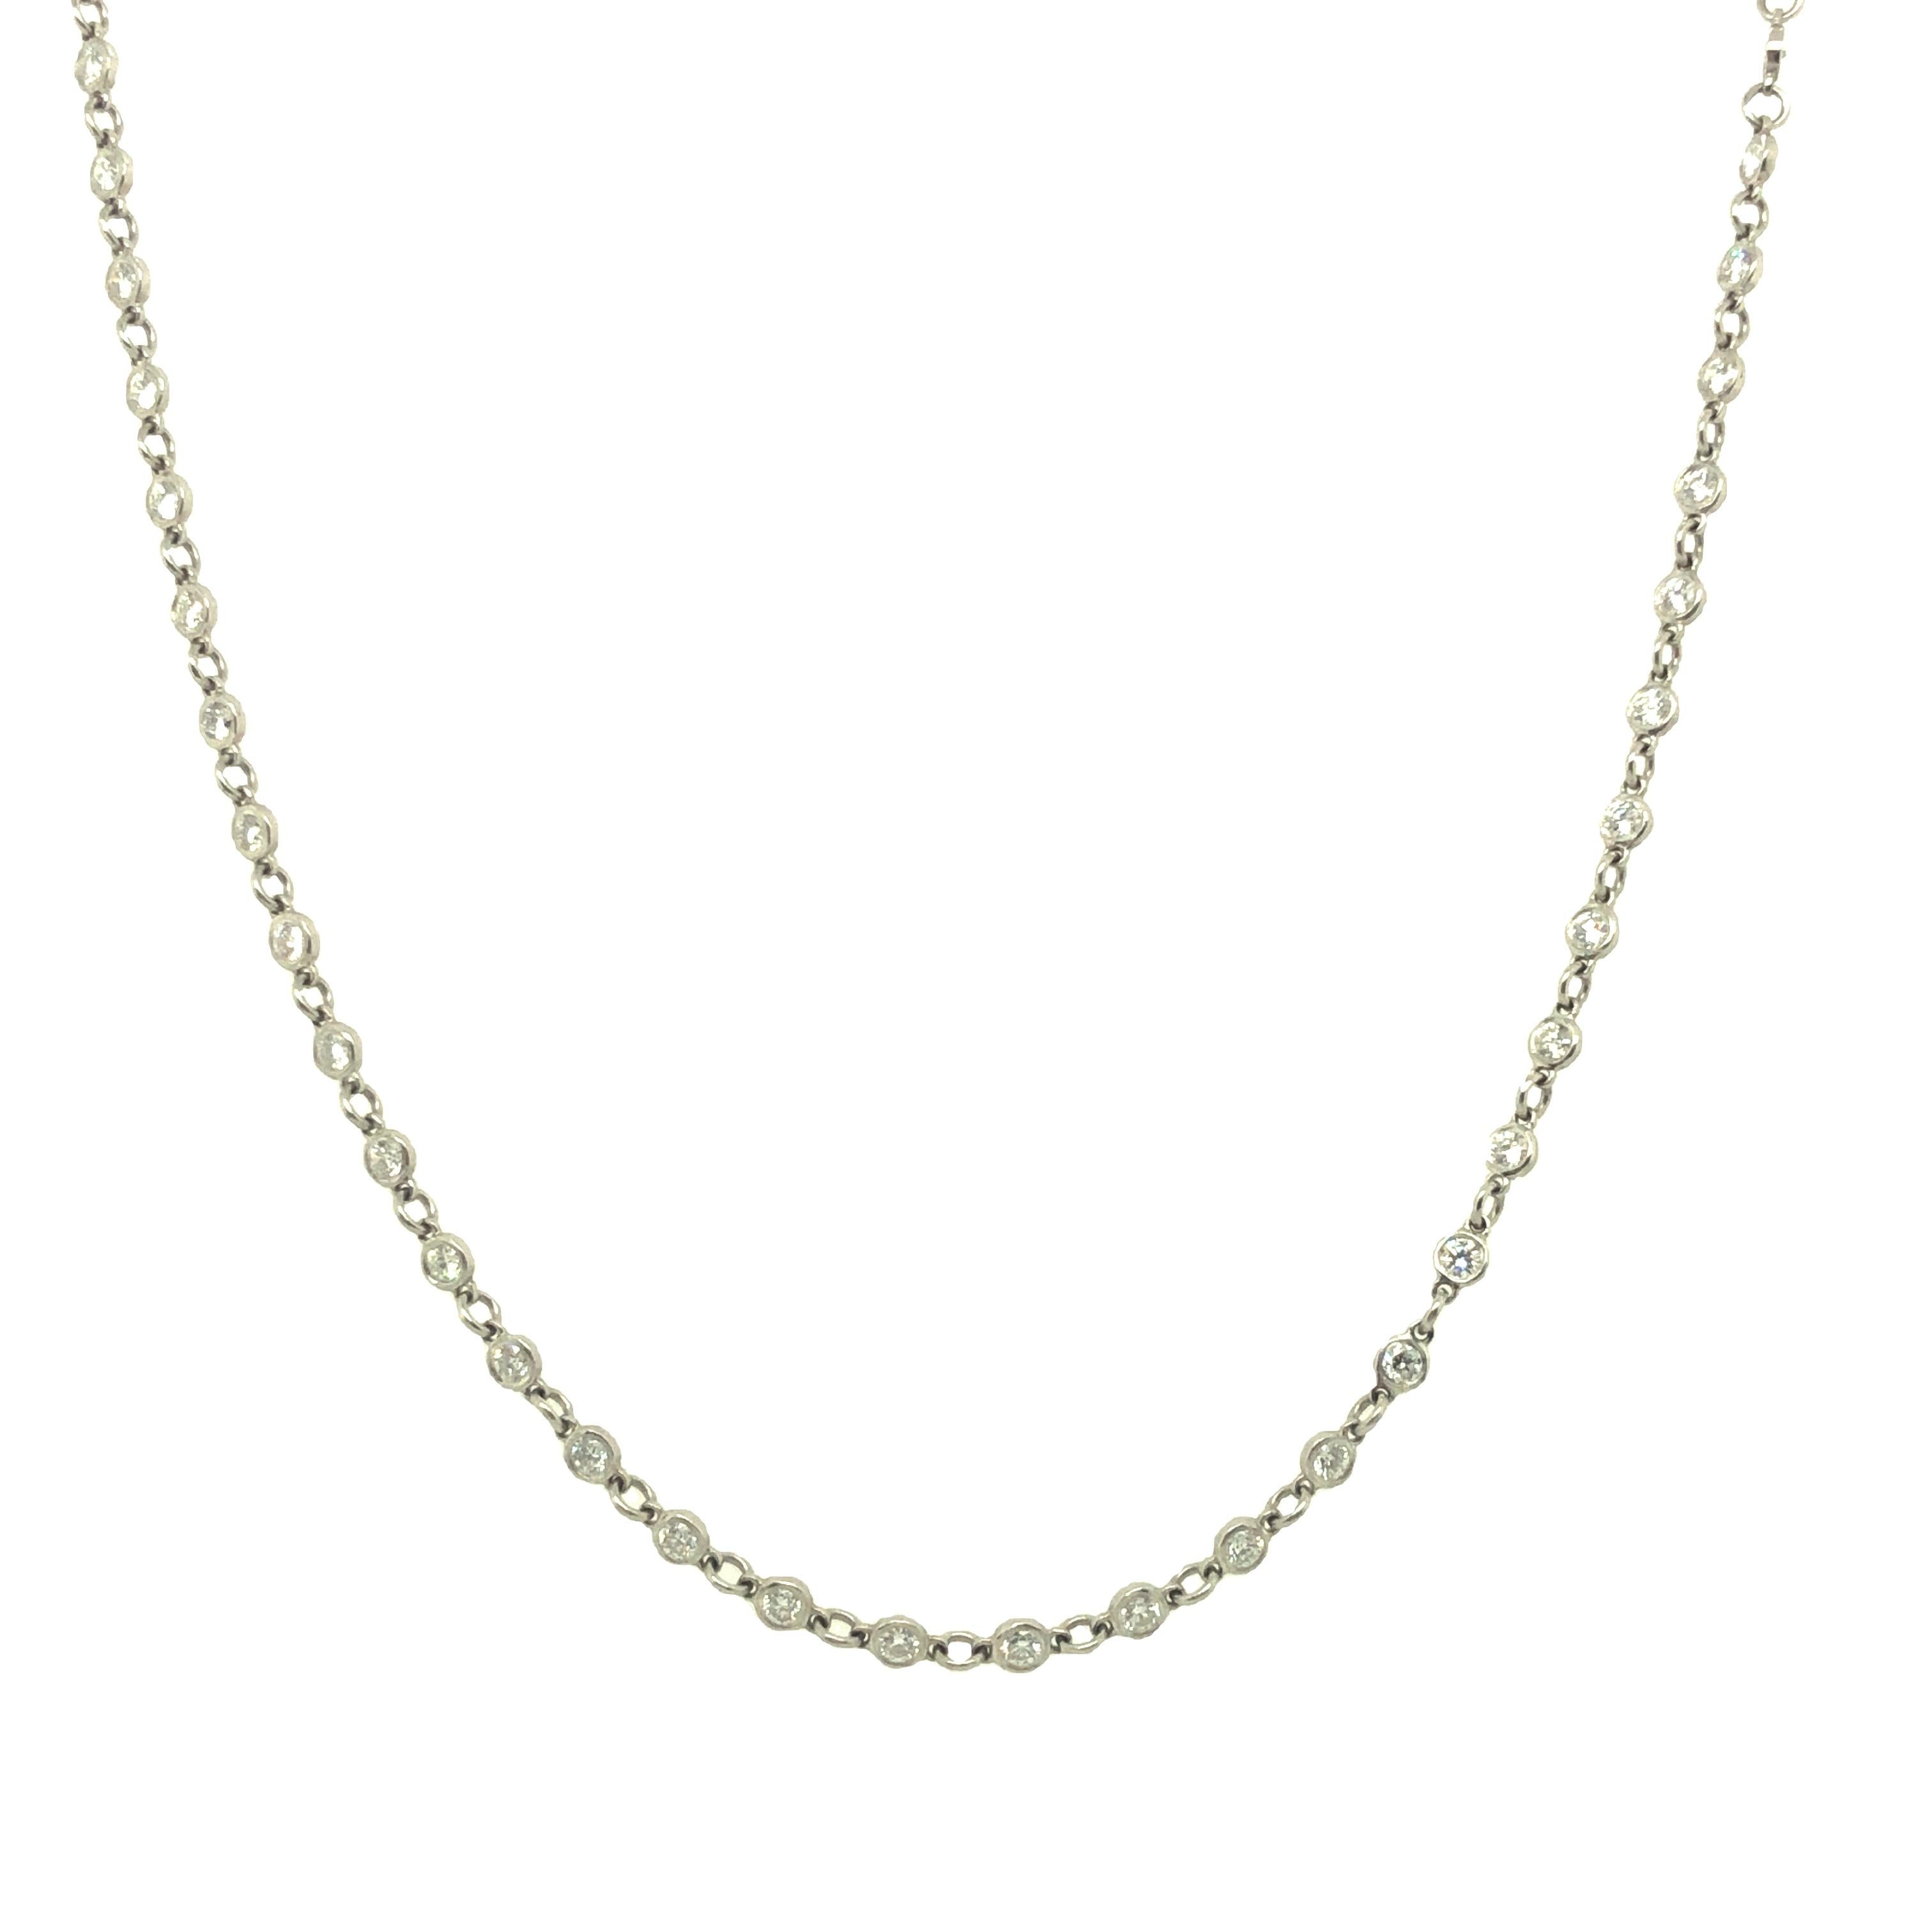 Bezel set diamond link necklace features 72 round brilliant cut diamonds, total weight of 2.24 carats, F-G VS quality.  It is handcrafted in platinum. The chain has smooth movement and will beautifully drape on your neck. It measures 16 inches long.